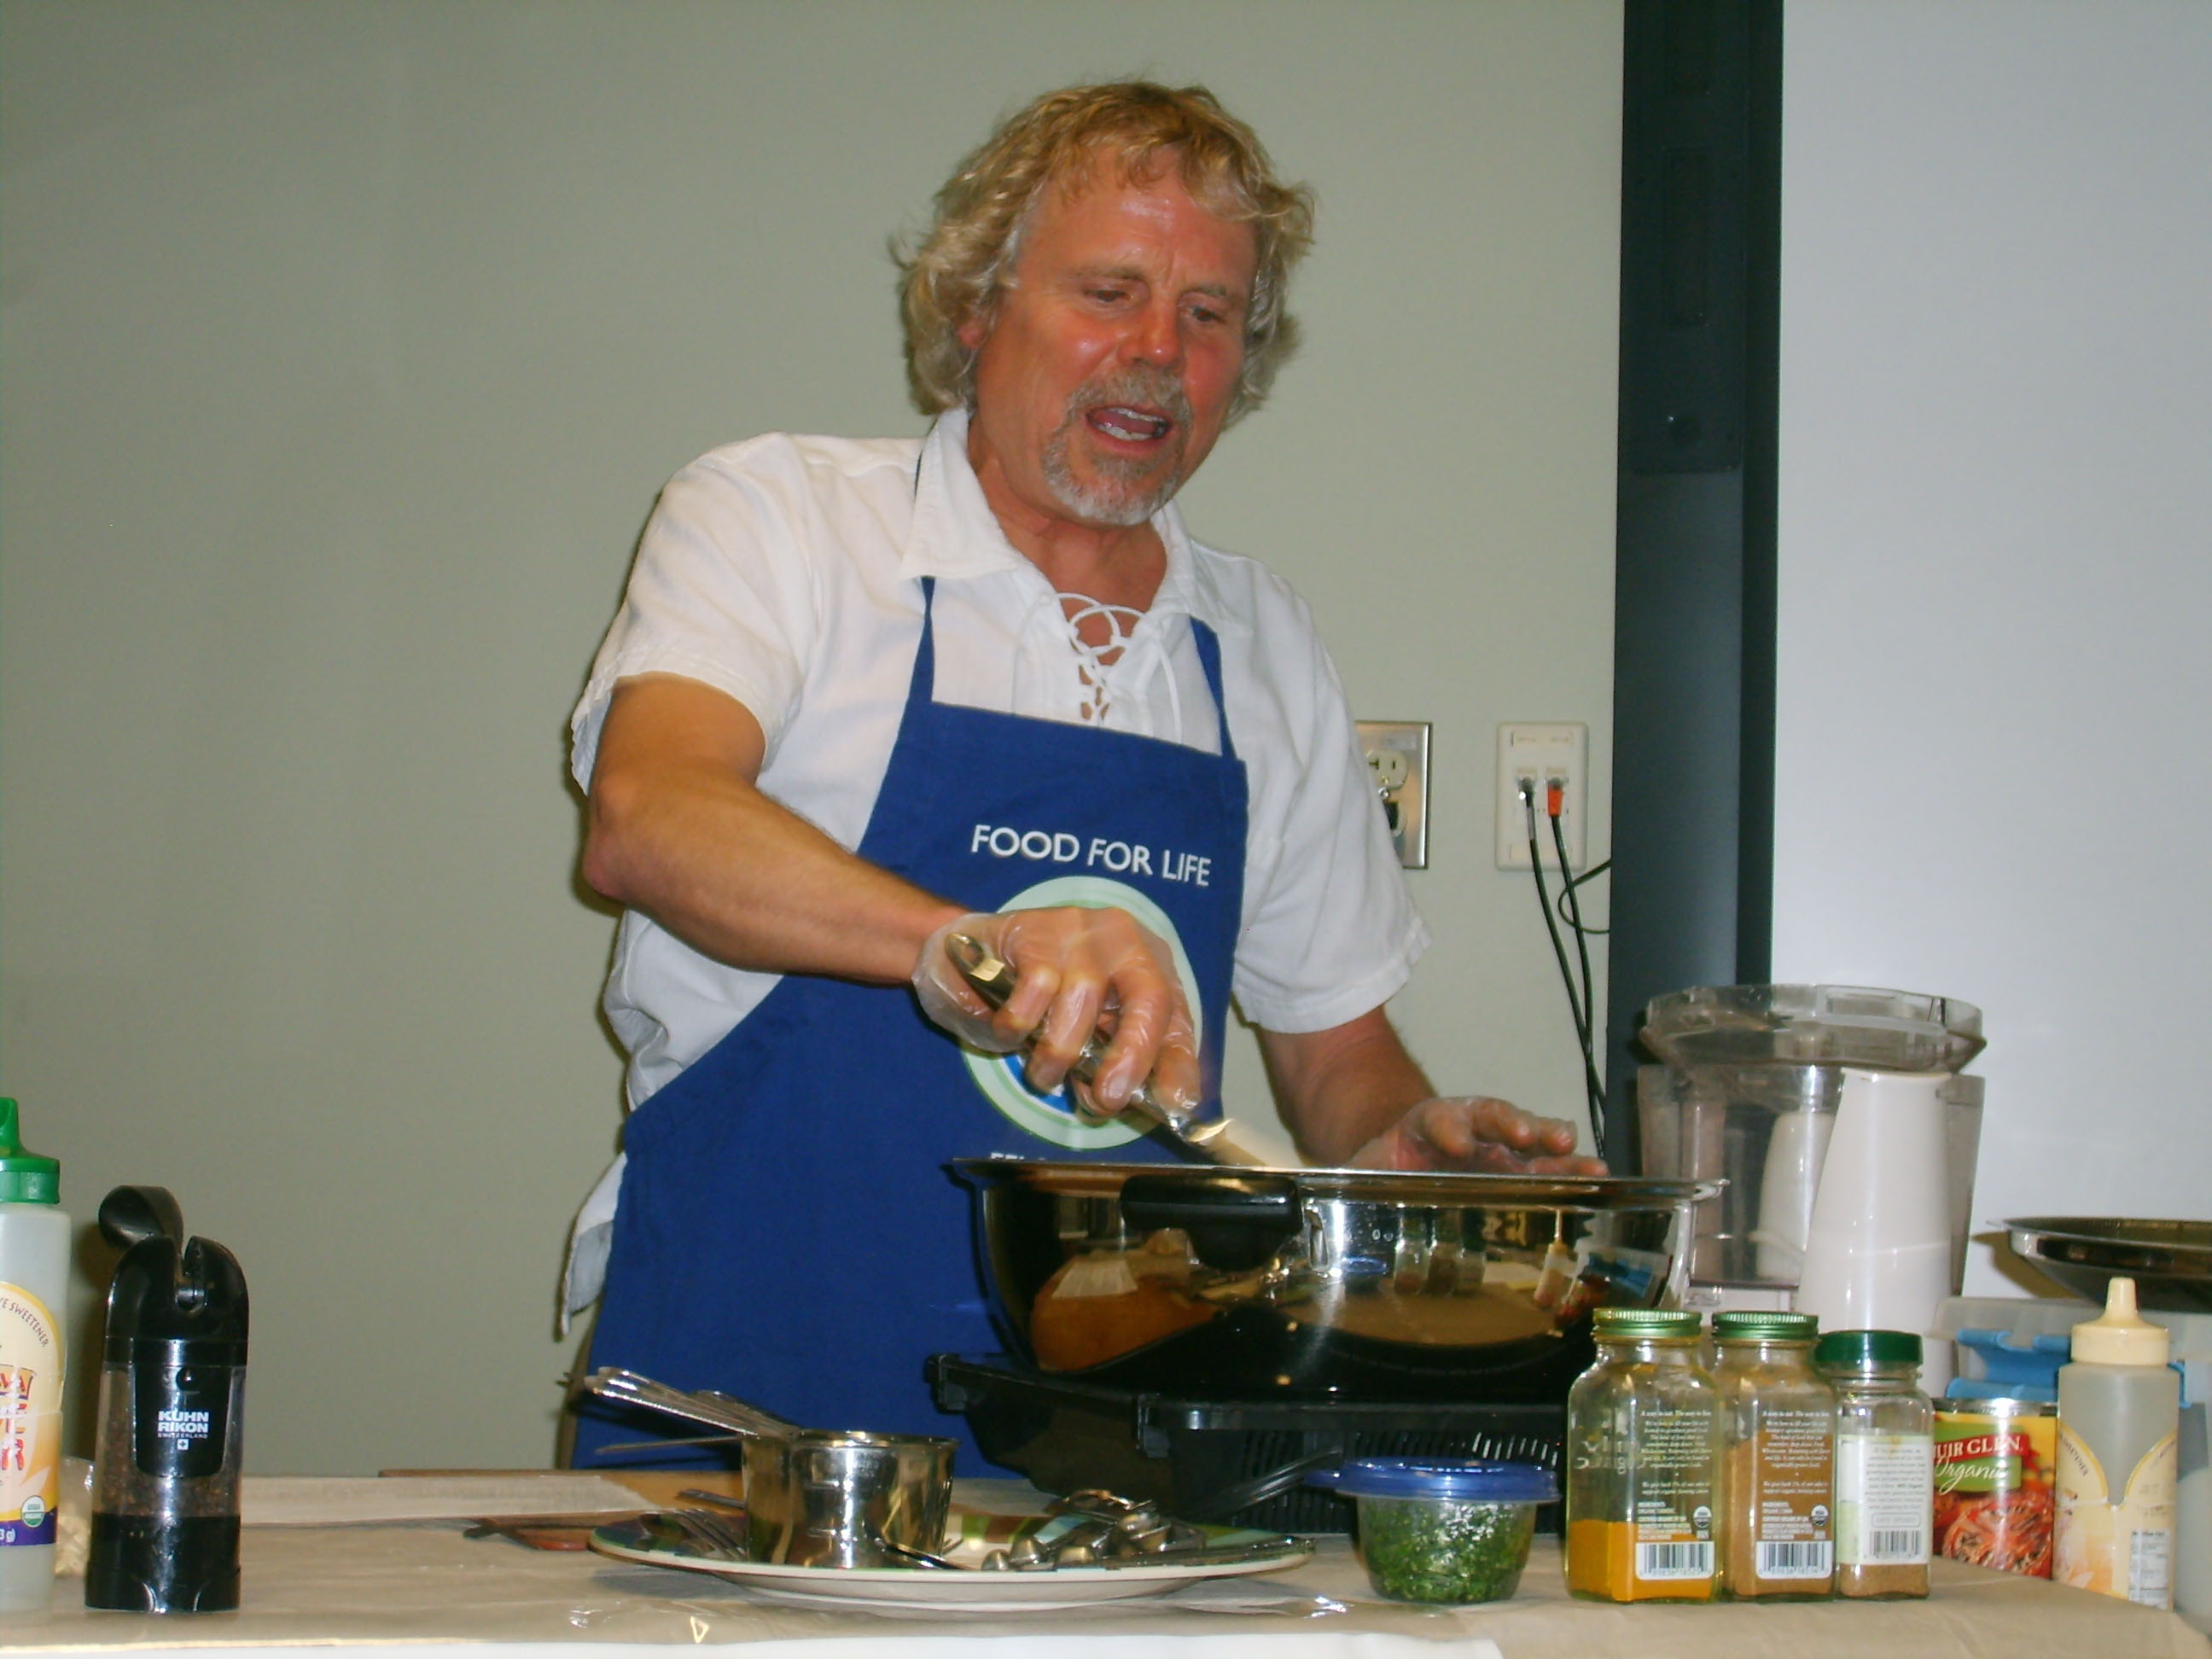 Phil Eherenman cooks and talks nutrition in a recent Food for Life class. -Photo by Lori Evans, Homer News